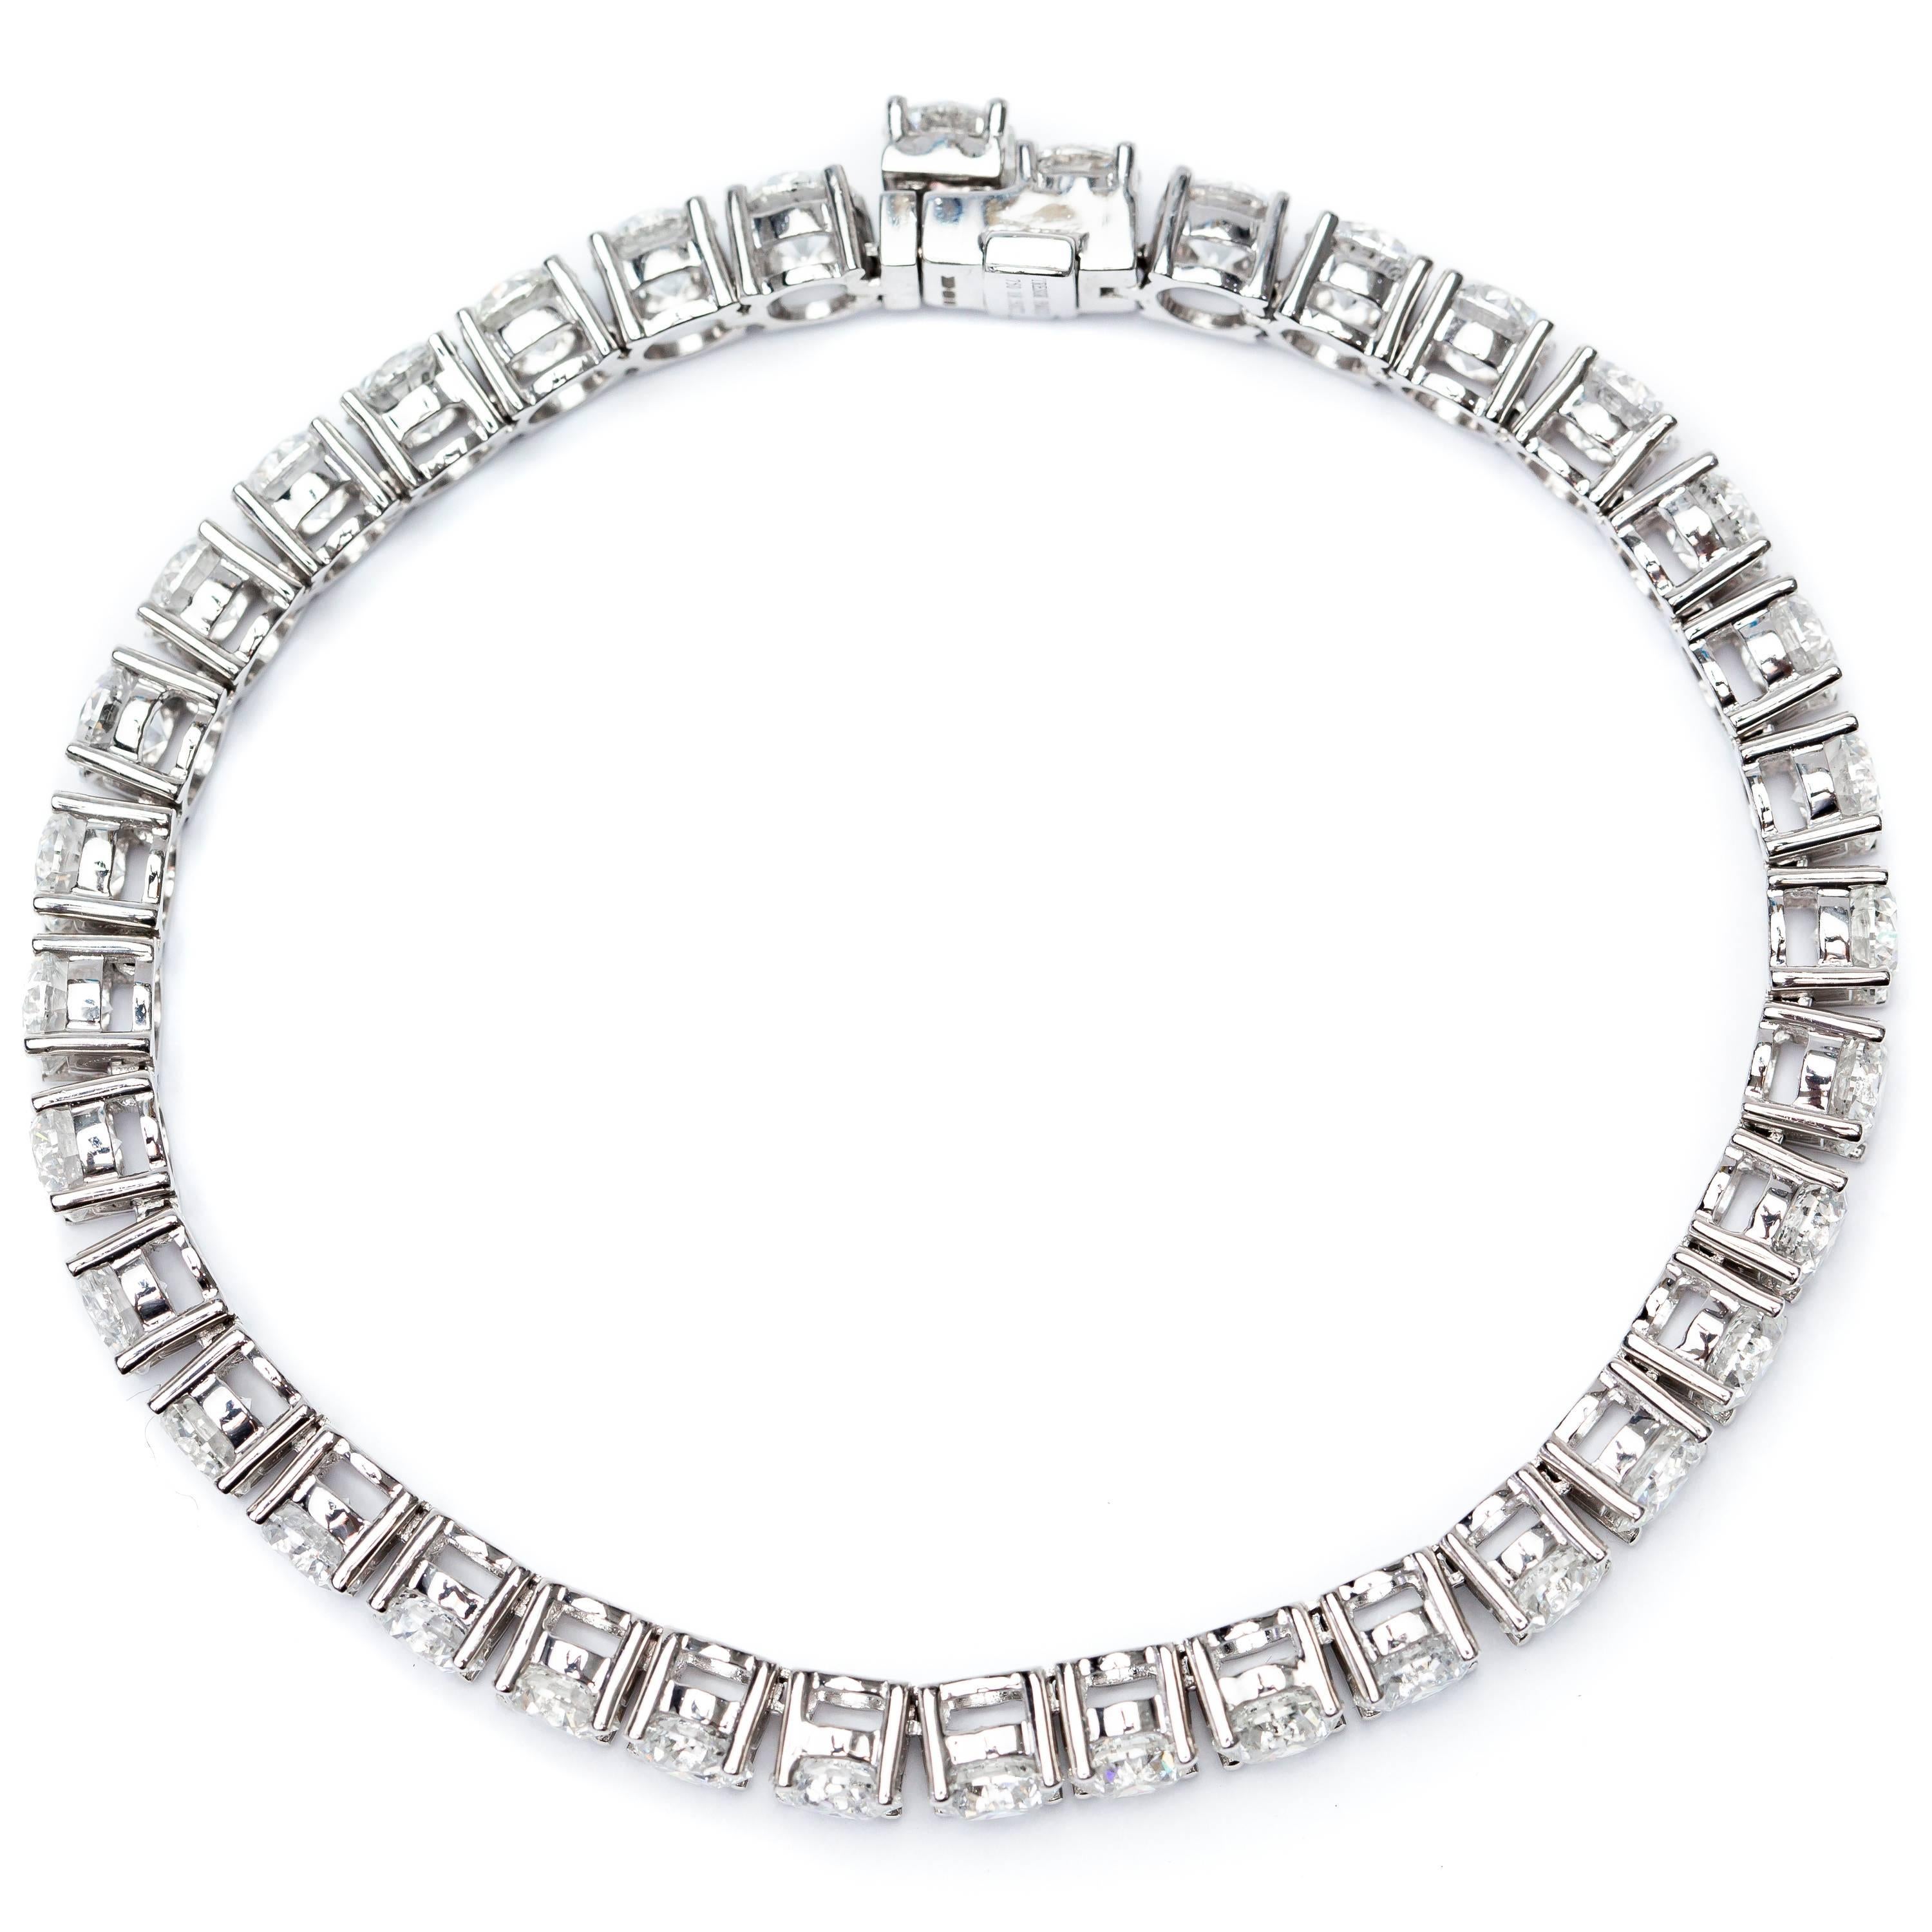 Bespoke 18.50 Carats of spectacular Round Brilliant Cut Diamonds White Color H Clarity SI1 are framed by 18 Karat White Gold for this stunning tennis bracelet. Set in a four claw straight line design with a security clasp. Other Carat sizes